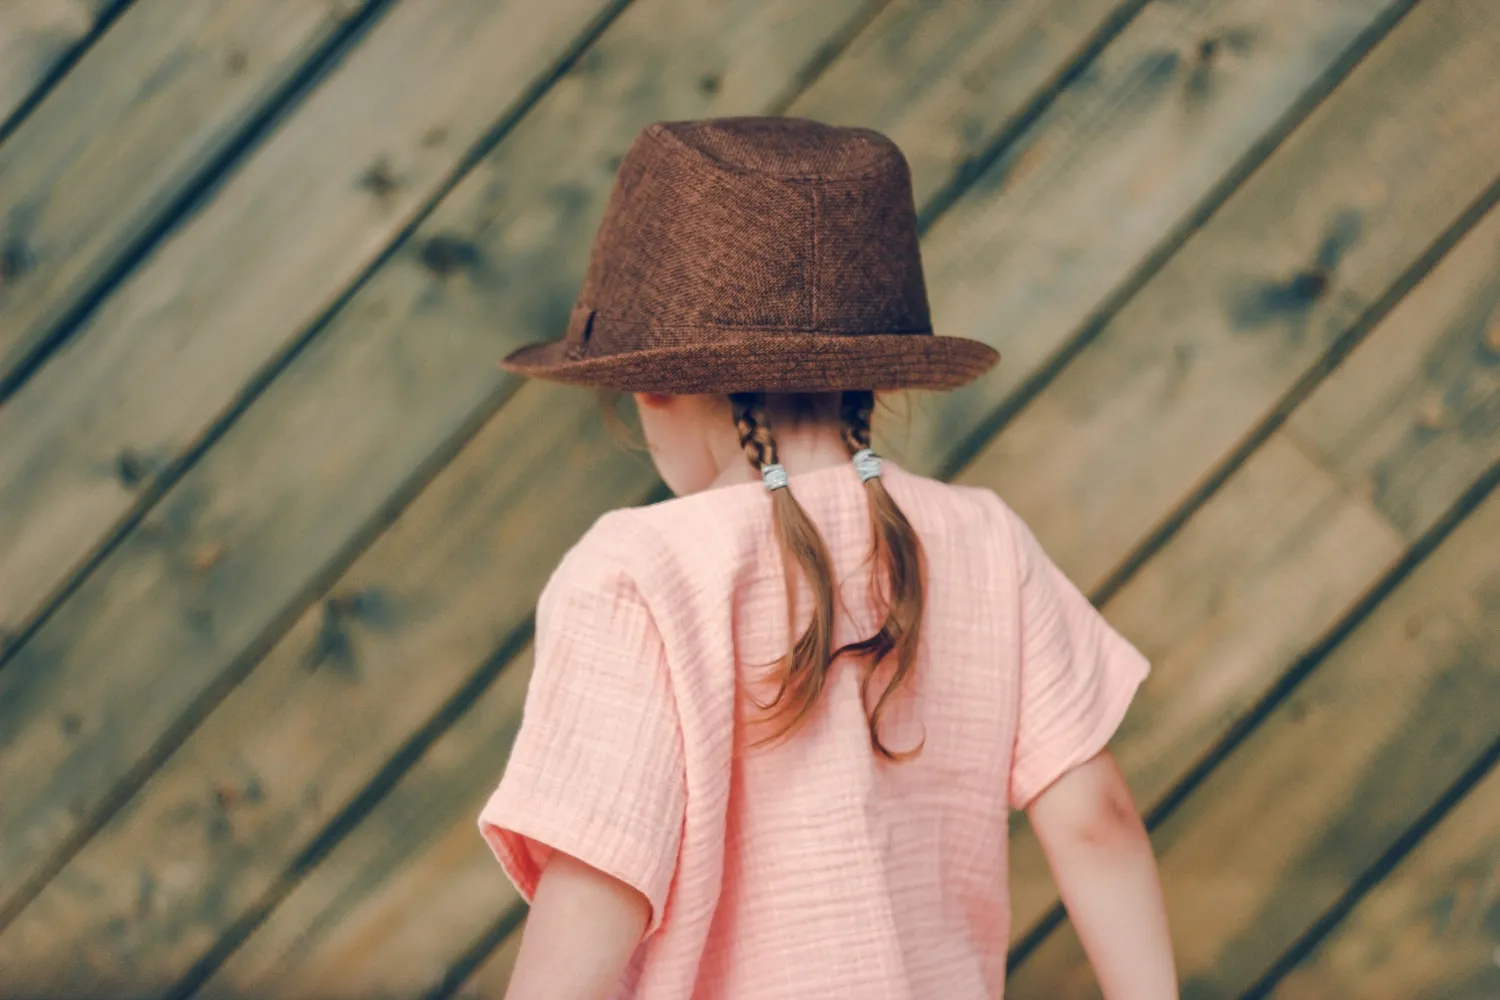 Cute little girl in rural style brown hat and muslin clothes on wooden background in a summer day